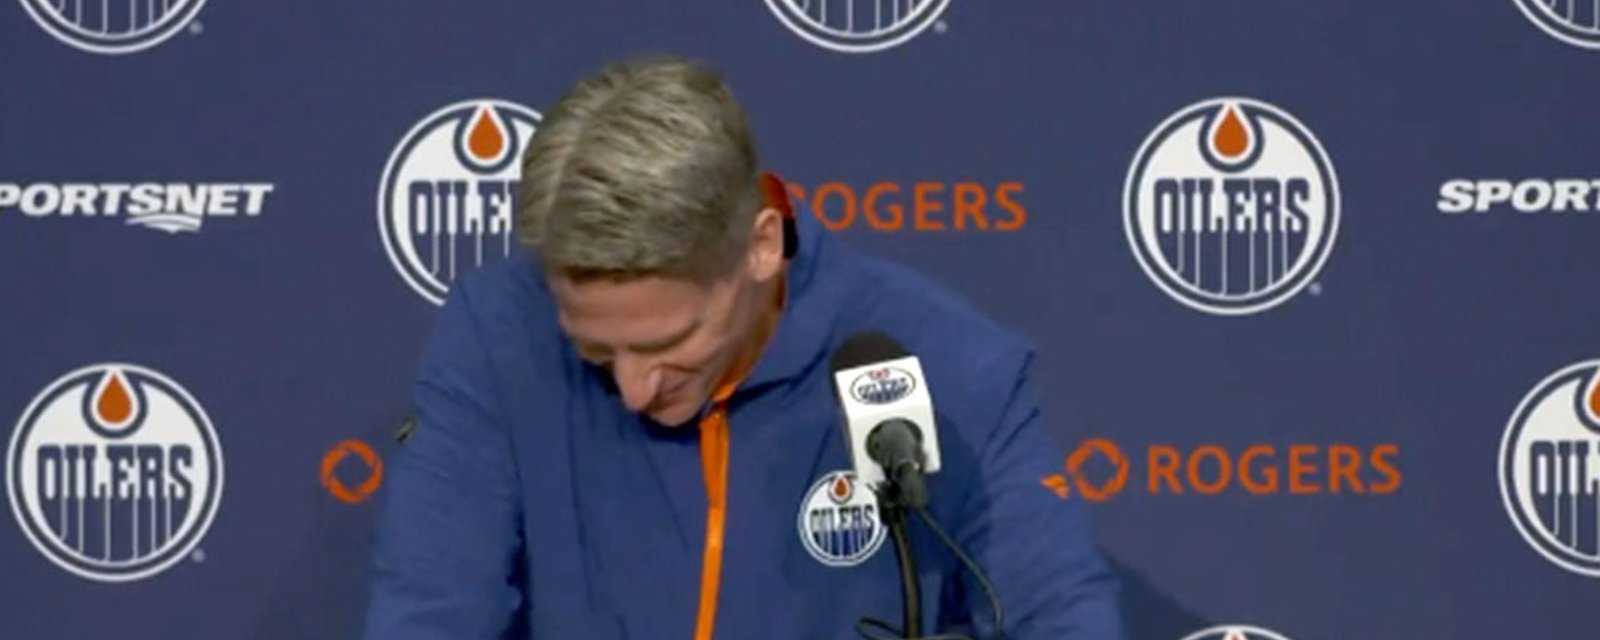 New Oilers coach Kris Knoblauch gets emotional during his introductory press conference